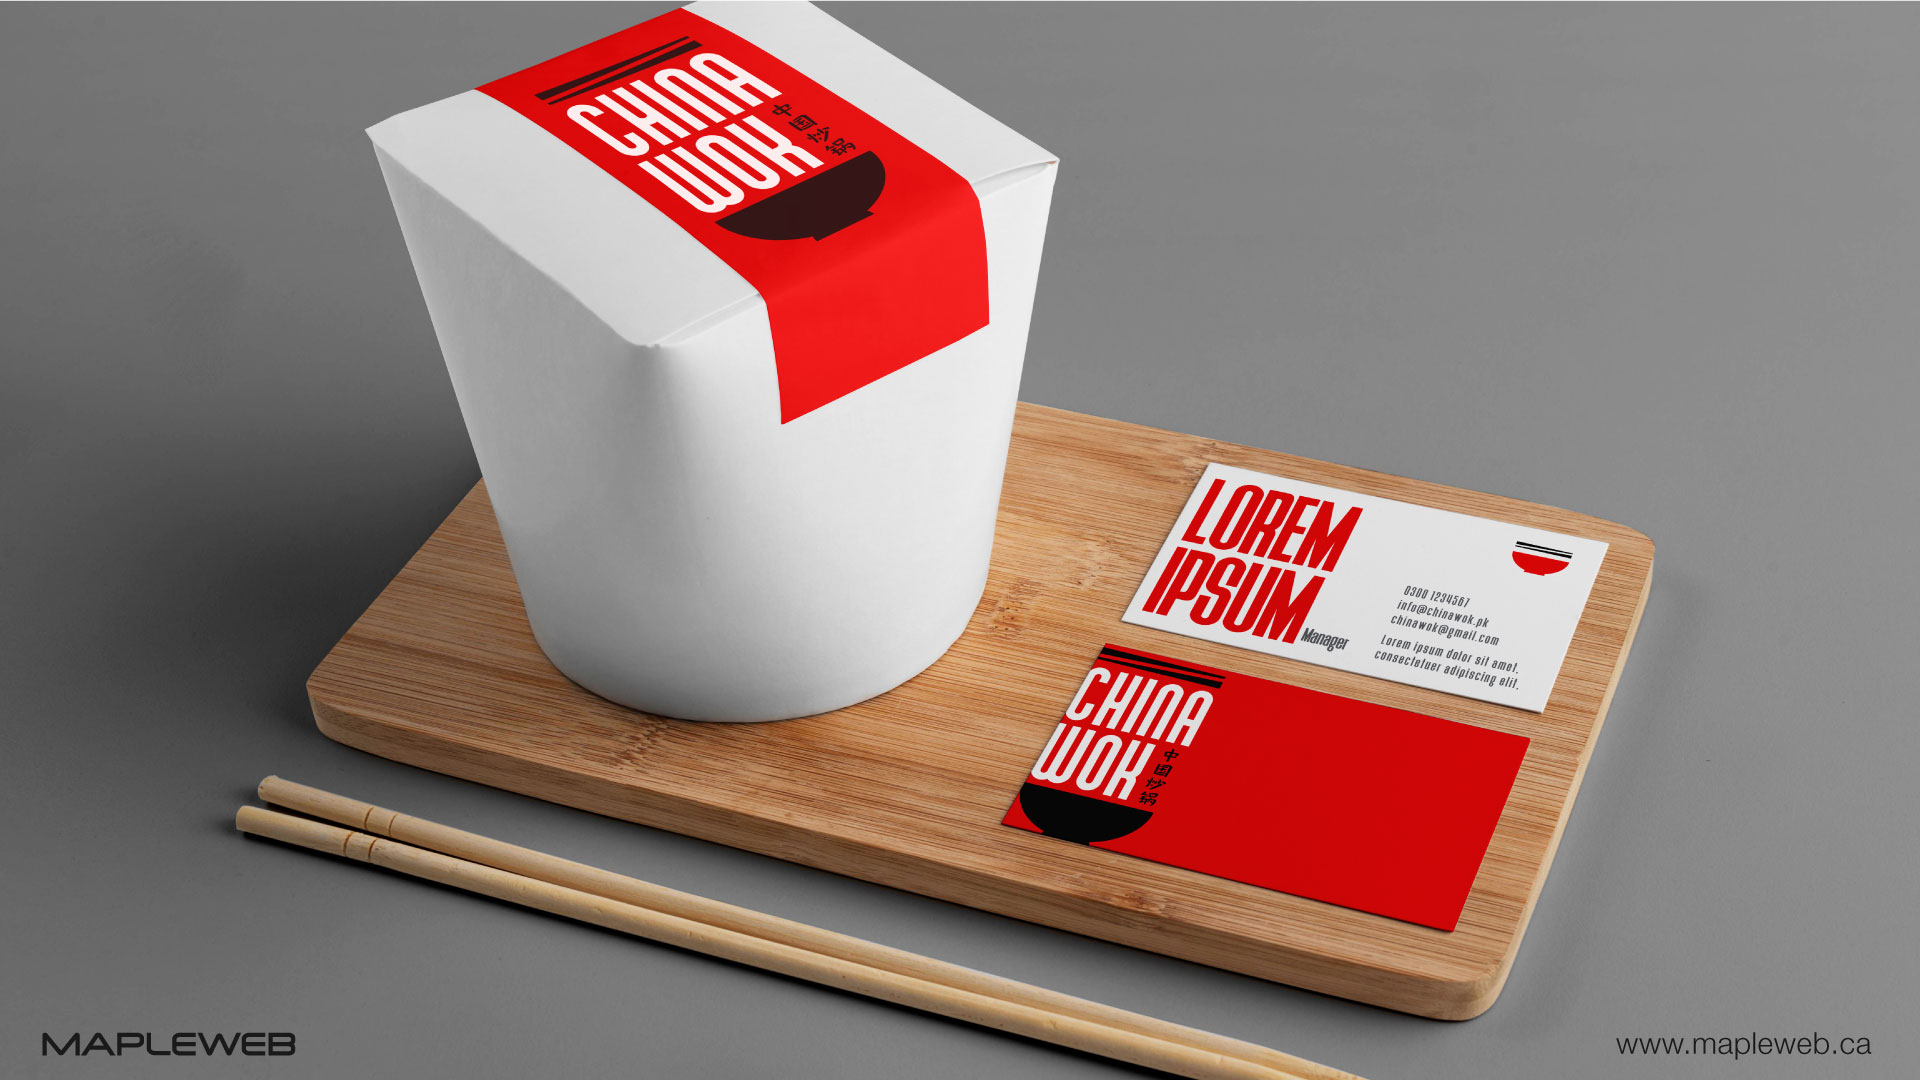 china-wok-brand-logo-design-by-mapleweb-vancouver-canada-food-package-stick-mock